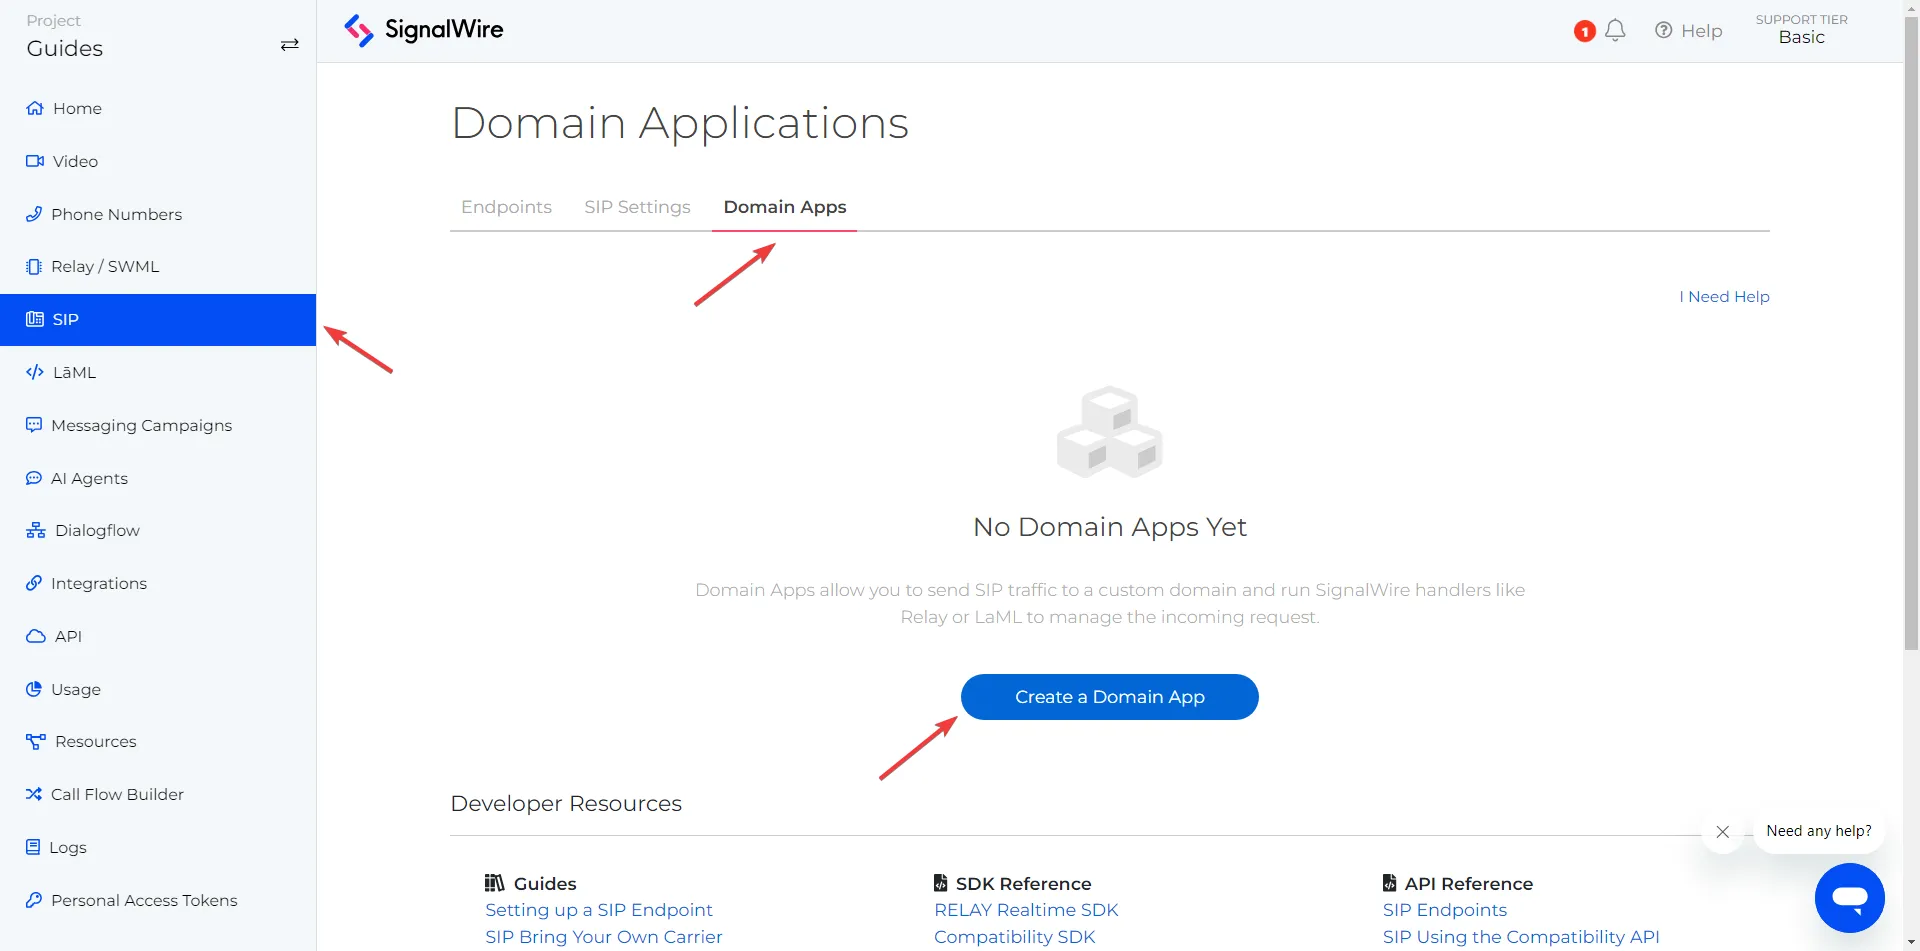 Domain App page with the option to create a new Domain App.